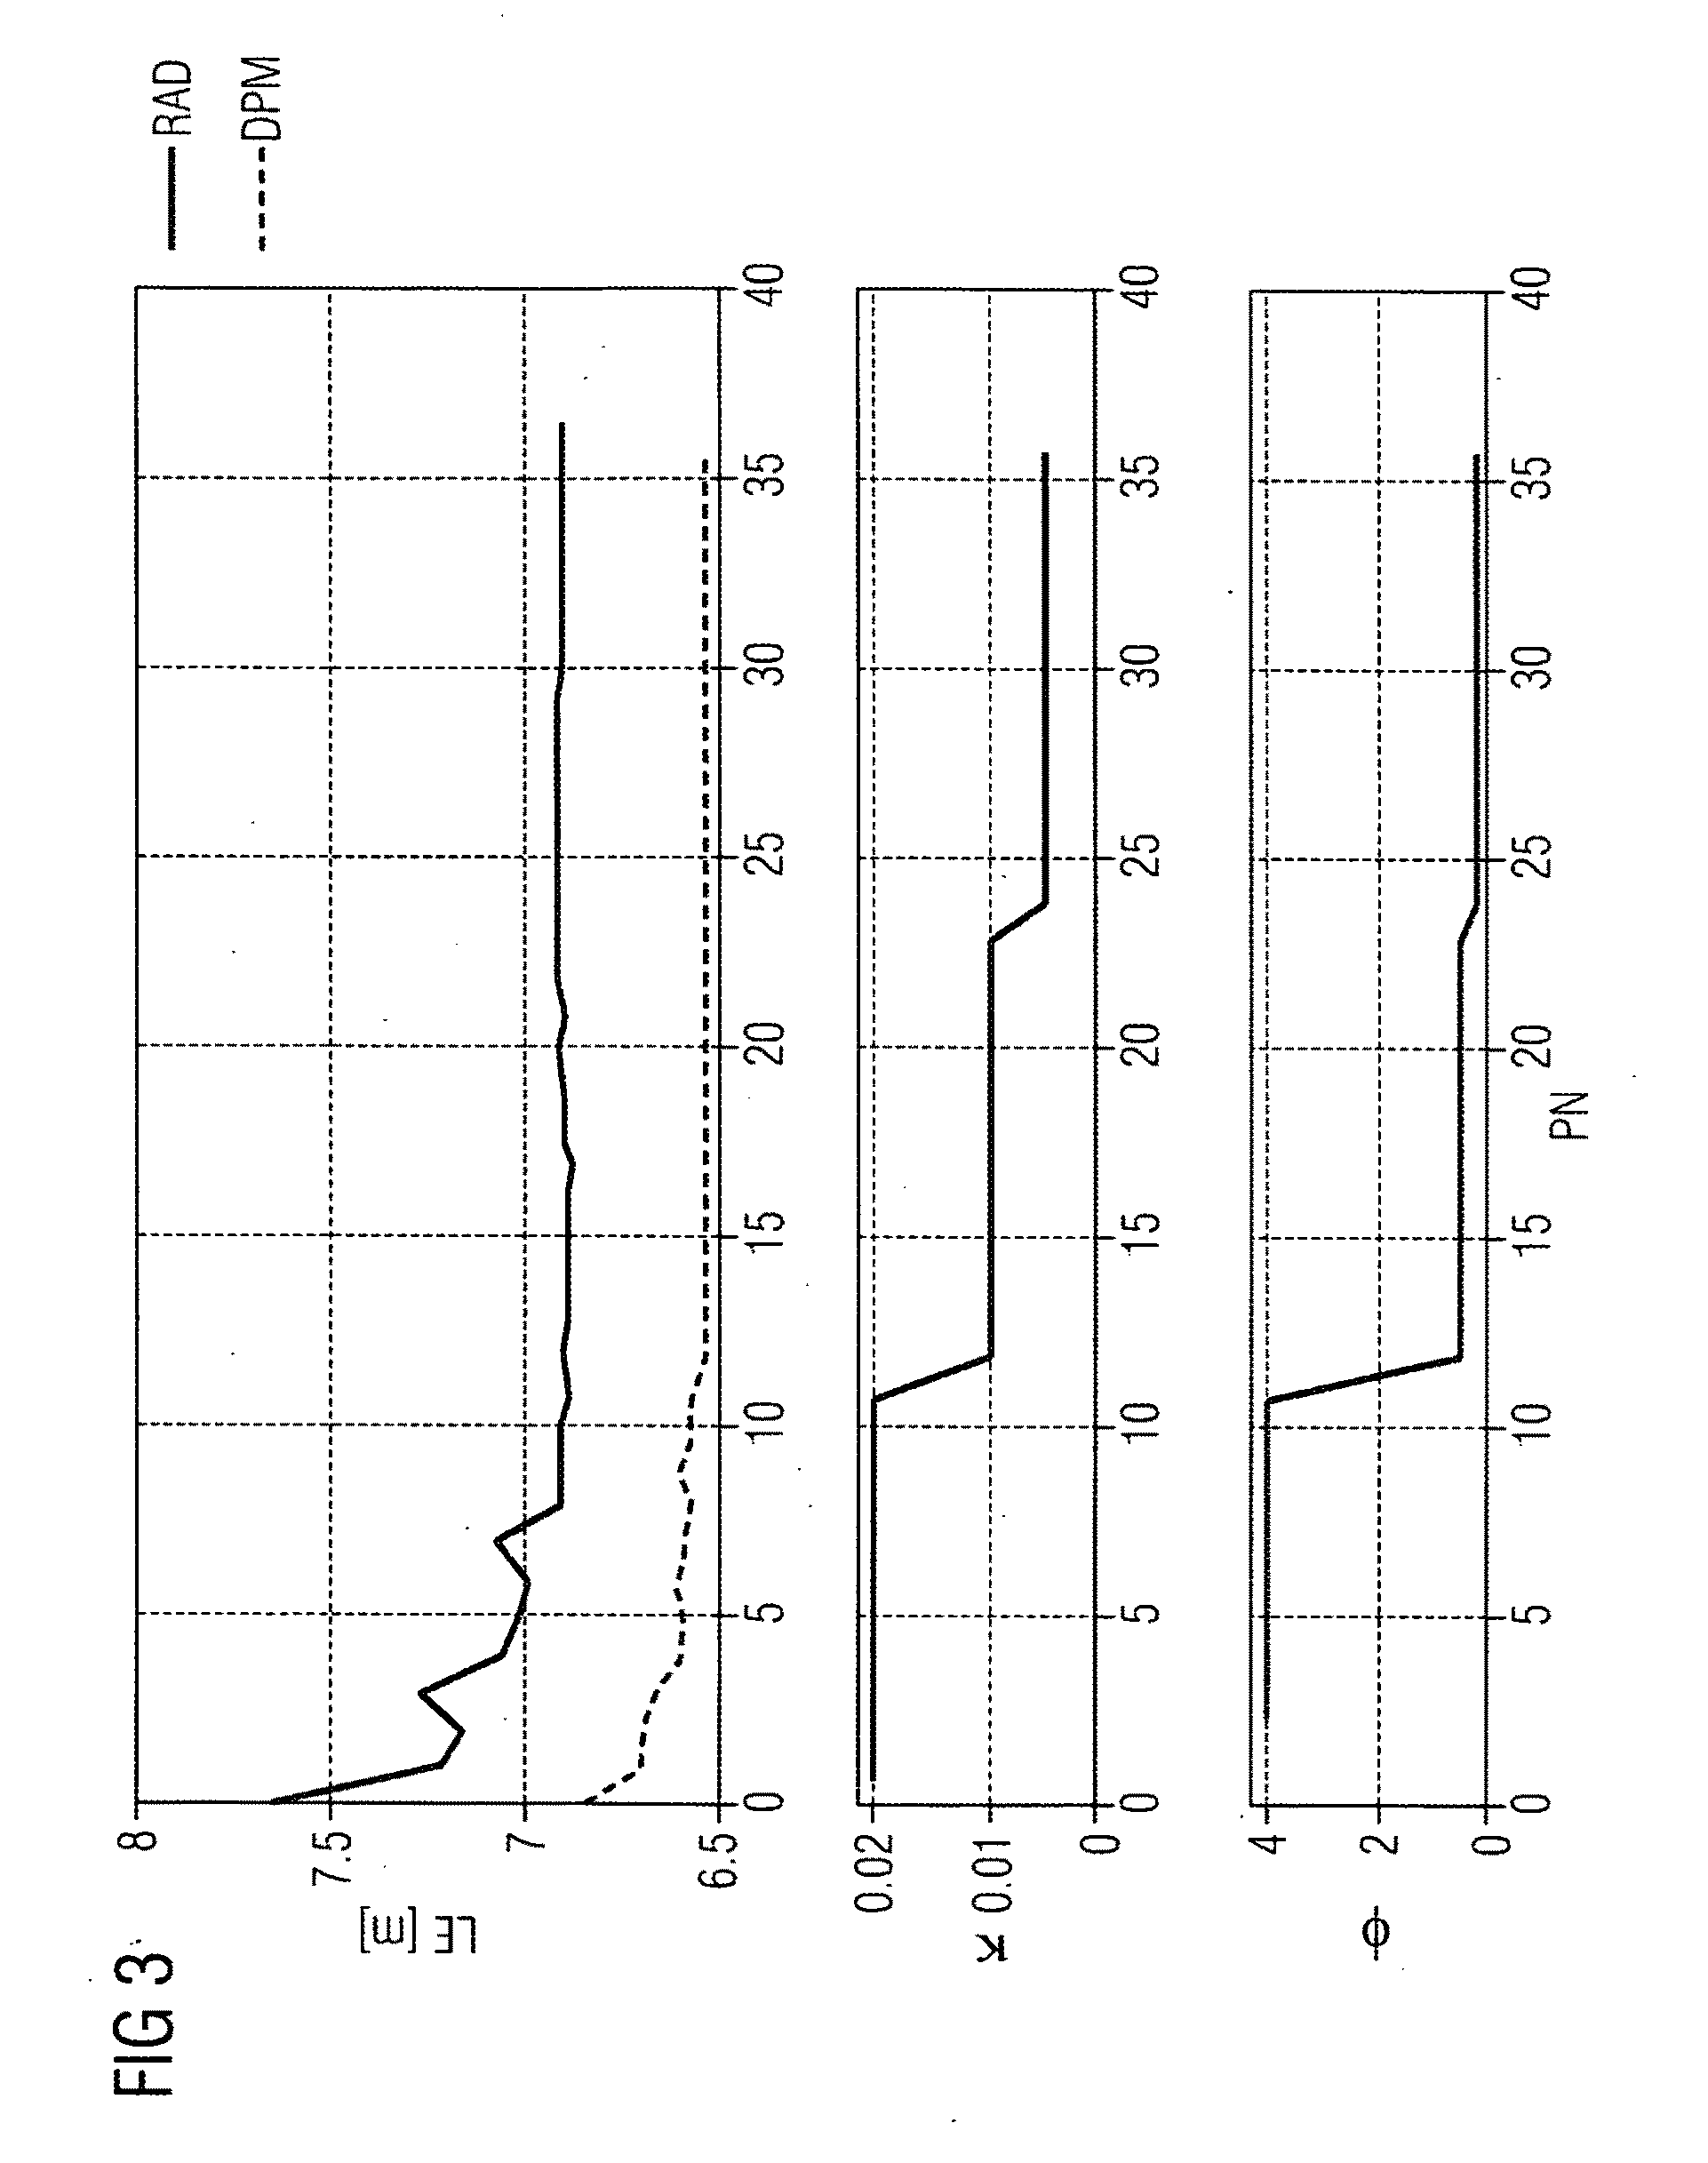 Method and Apparatus for Determining the Location of a Mobile Object